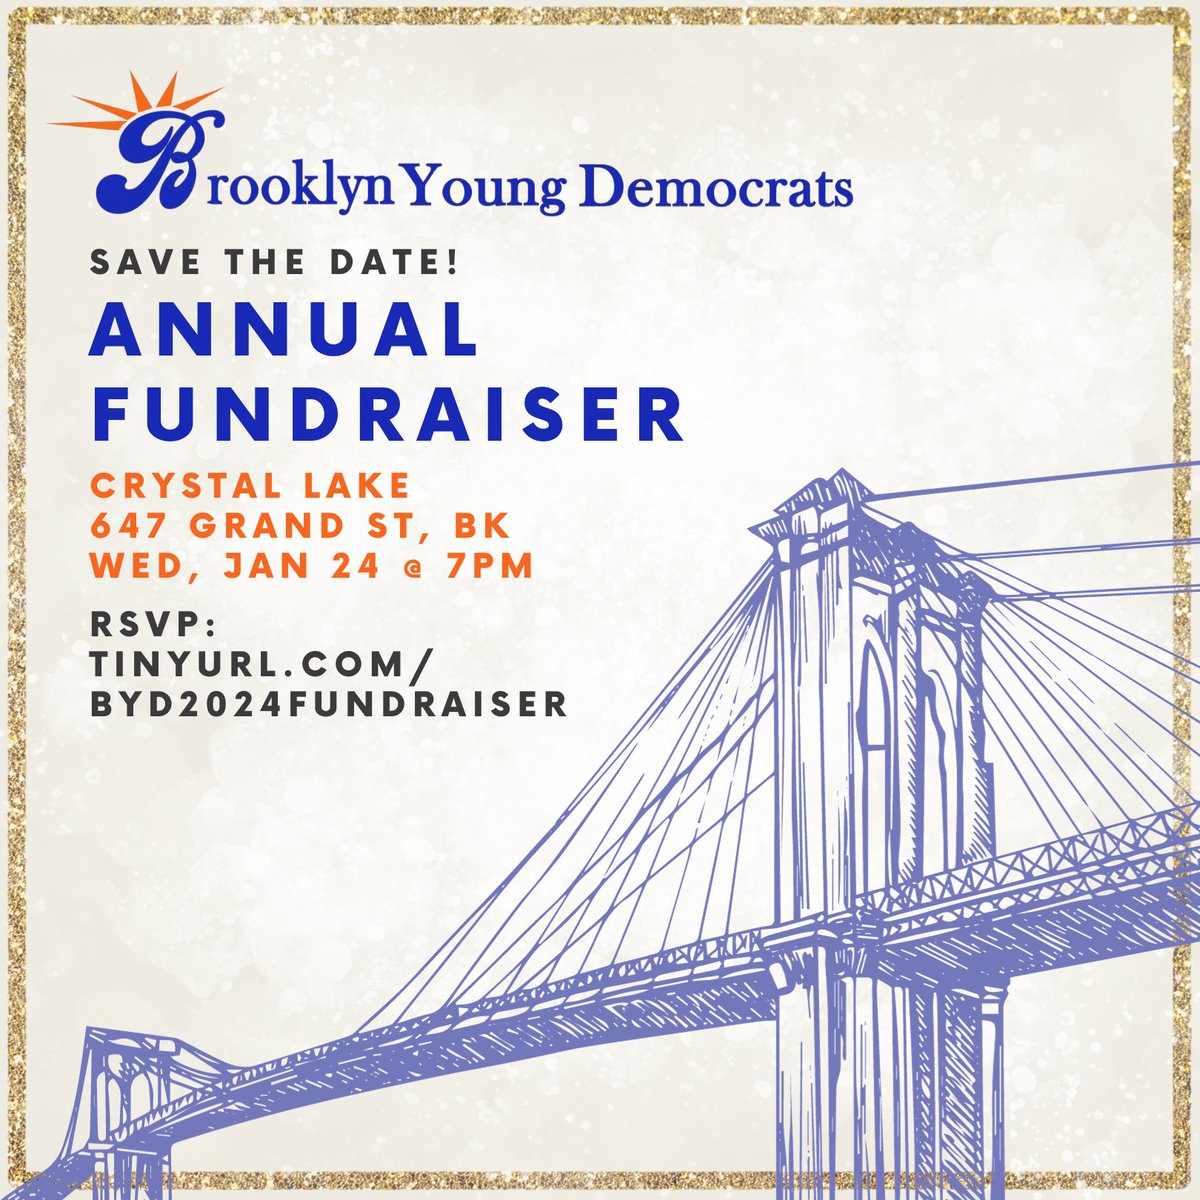 Join us on Wednesday, January 24th to celebrate hard-won victories and gear up for 2024! We’ll enjoy food and drinks, and honor the Brooklynites fighting to create a better borough for all. More details to come soon! For now, get tickets at tinyurl.com/BYD2024Fundrai….